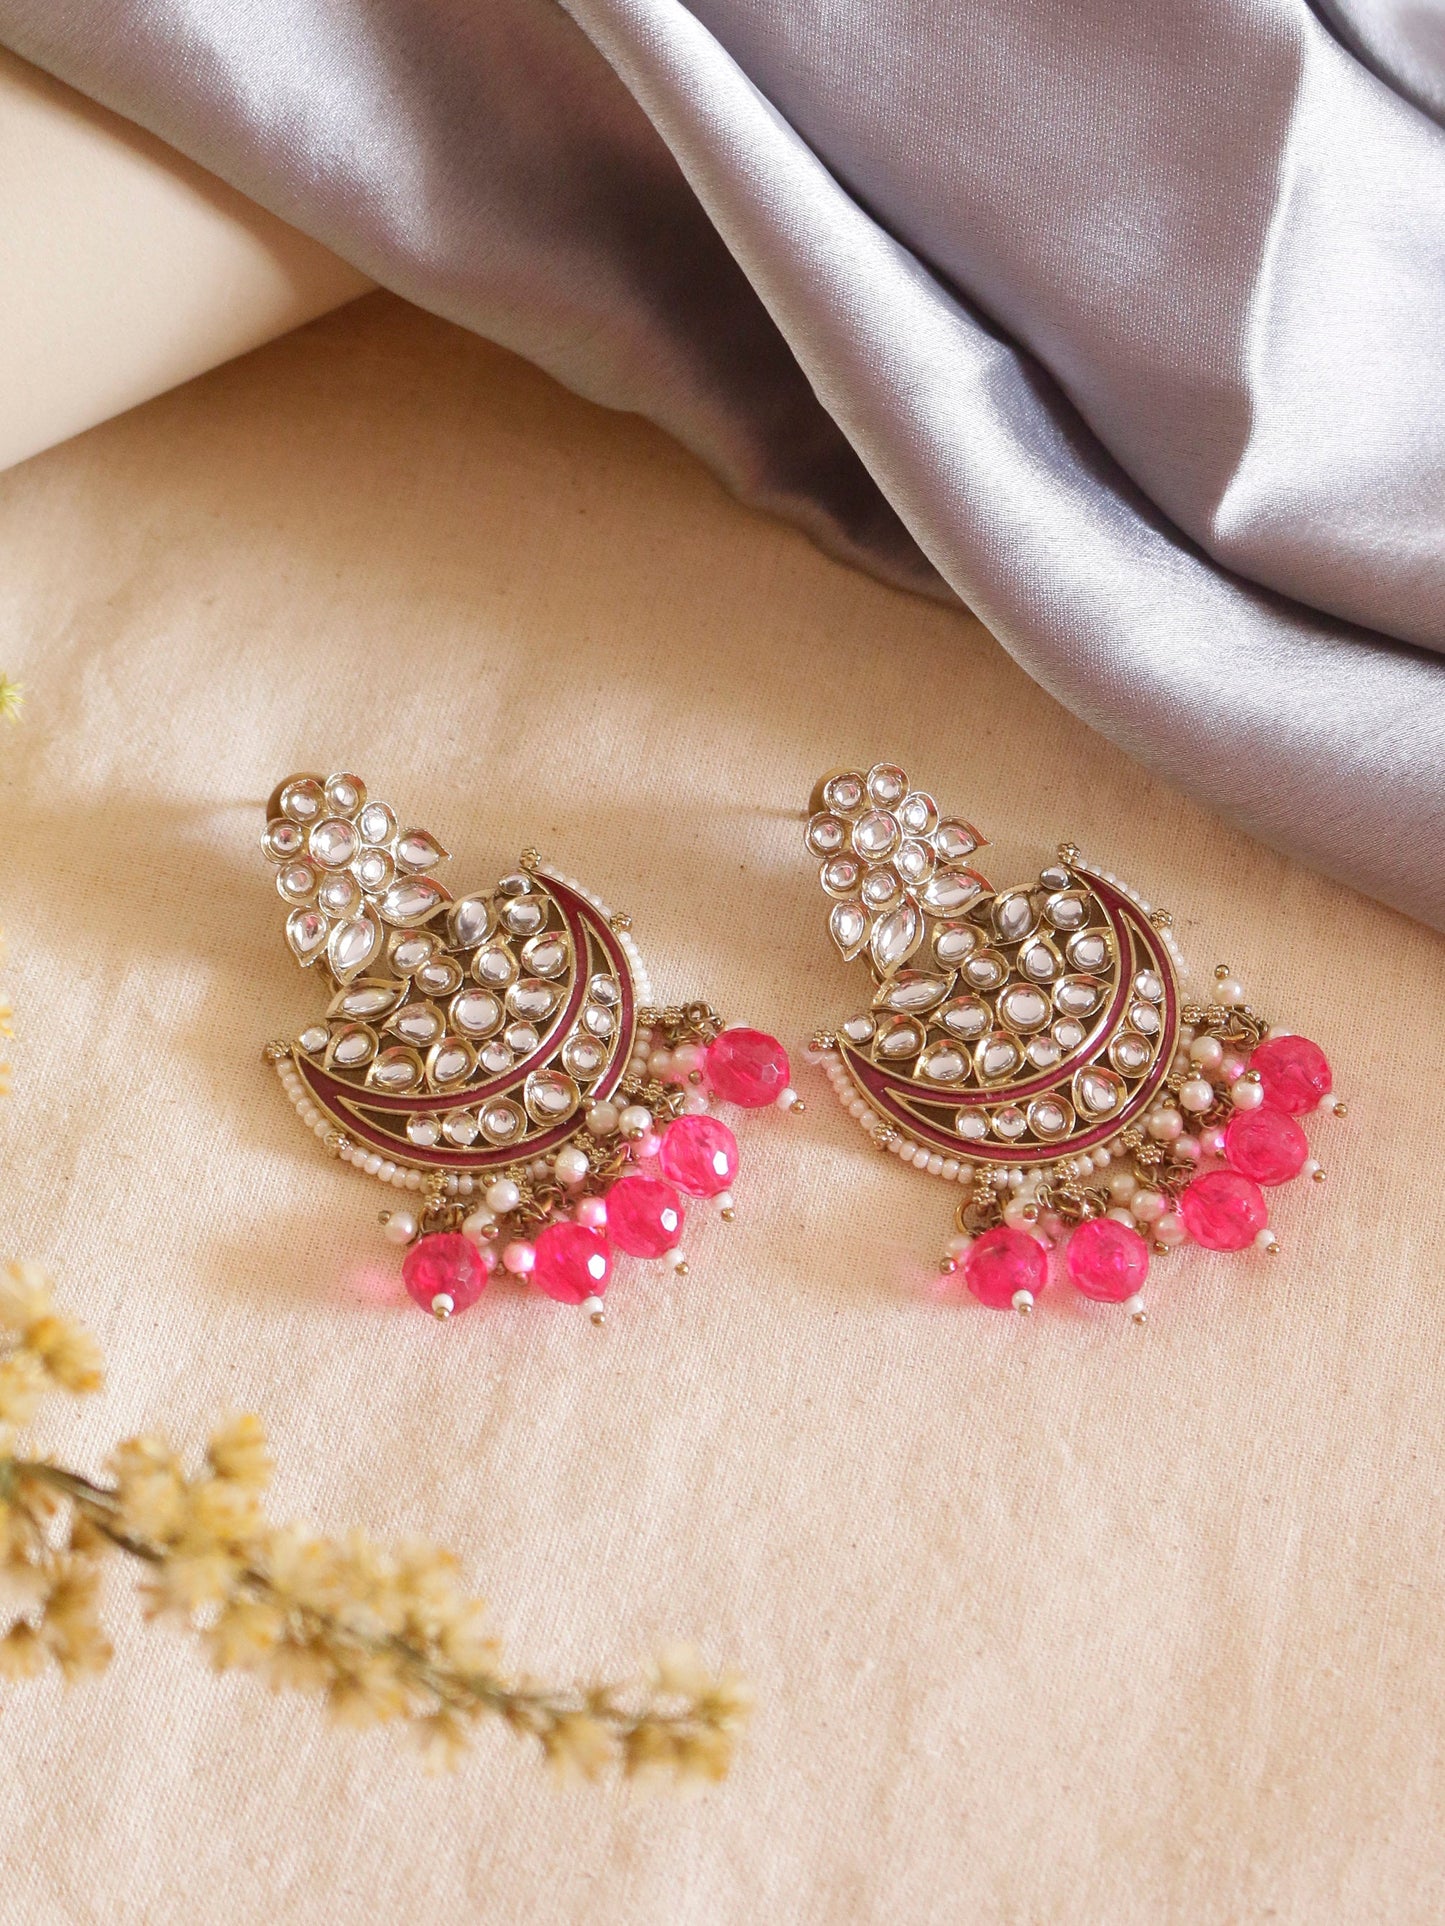 Swisni Alloy Golden Earrings with Maroon N Pink Beads For Women|For Girls|Gifting|Anniversary|Birthday|Girlfriend